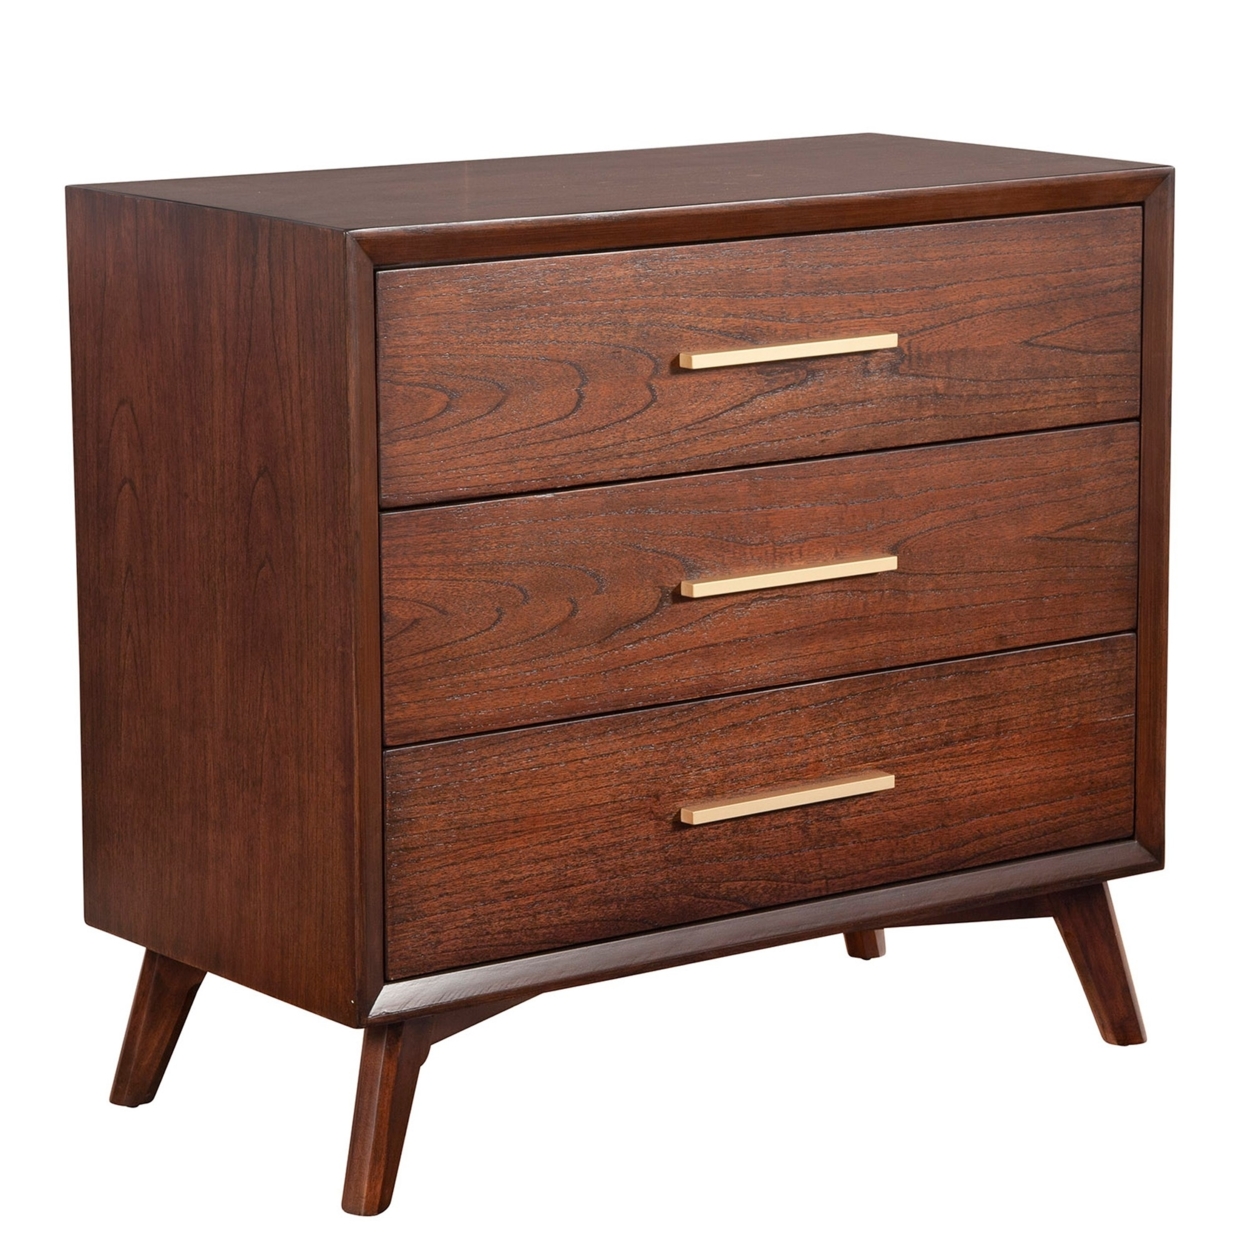 33 Inch Wooden Chest With 3 Drawers, Small, Brown- Saltoro Sherpi